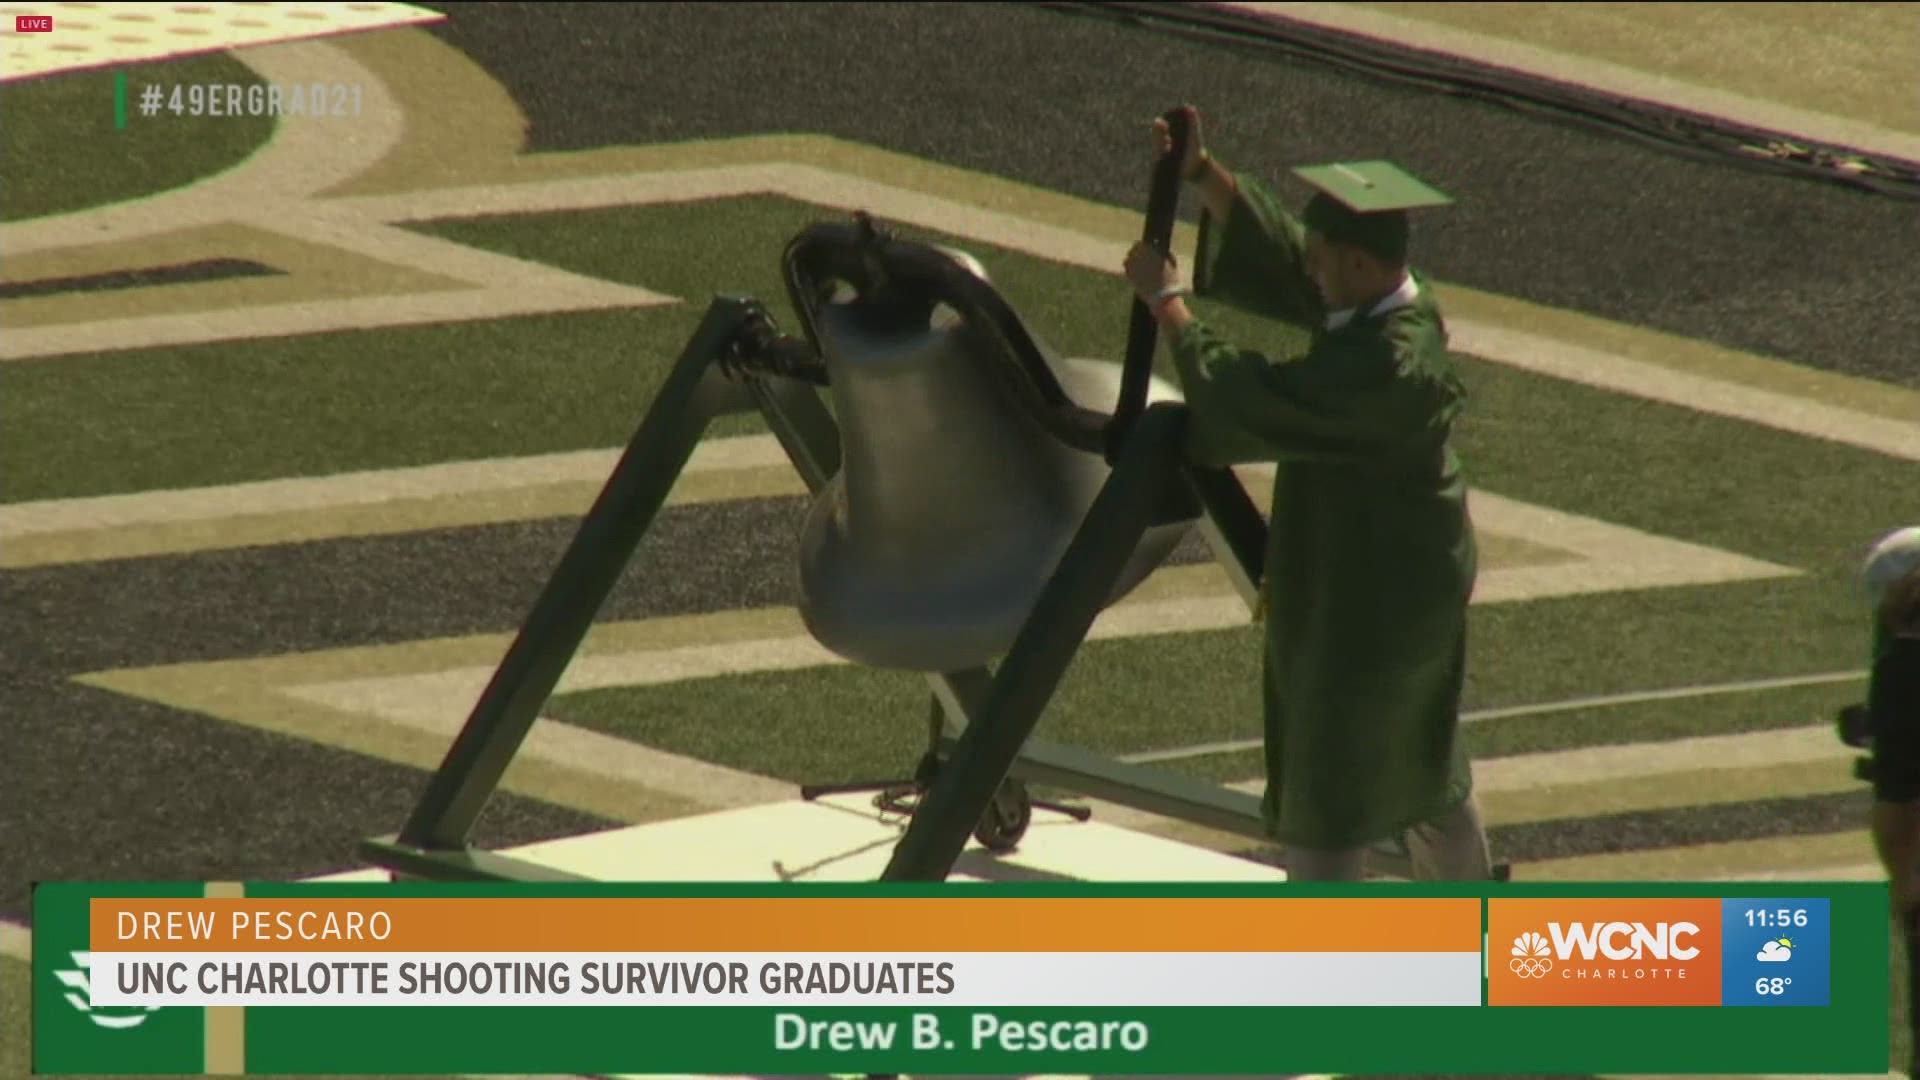 Drew Pescaro, one of the students who was injured in the deadly shooting at UNC Charlotte in 2019, graduated this weekend from the school.